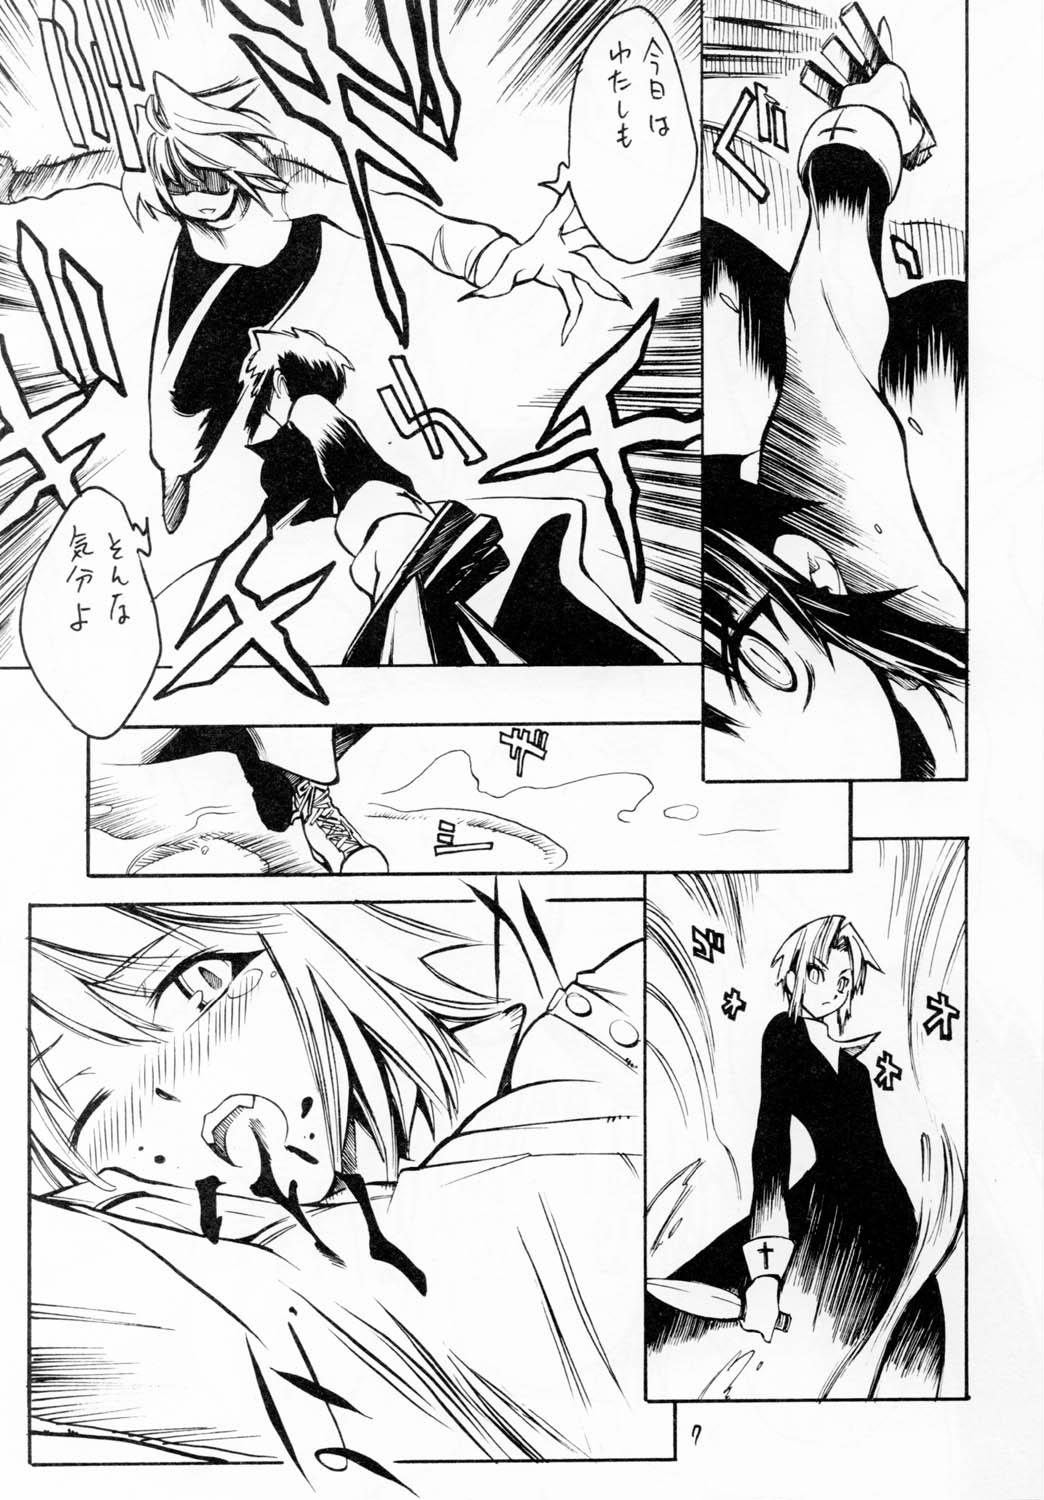 Fingers WHITE FANG - Tsukihime Gay Dudes - Page 6